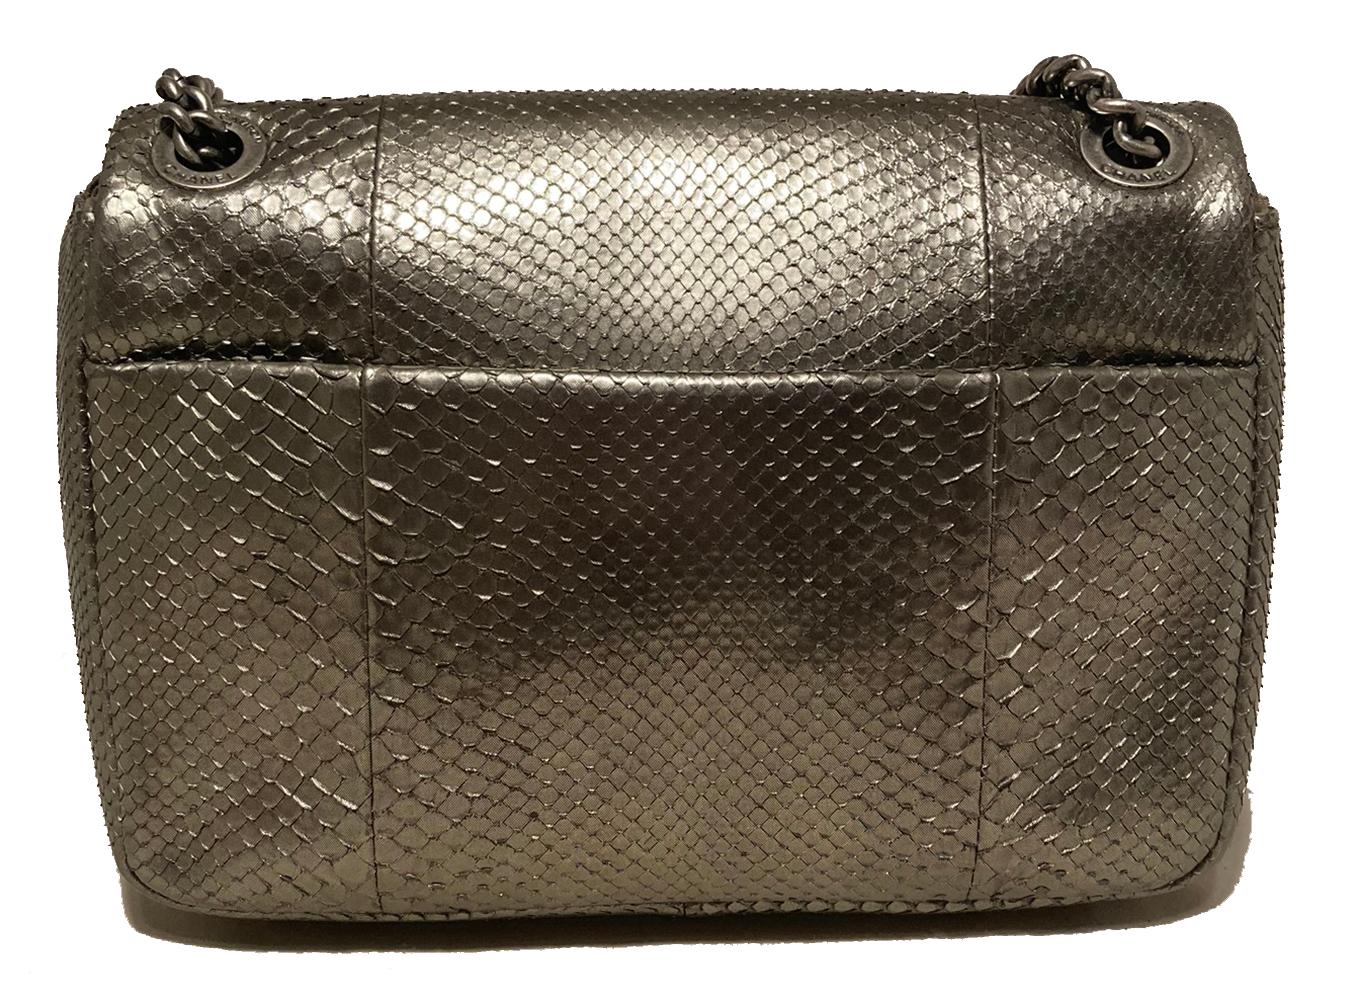 Chanel Grey Metallic Python Shanghai Flap Bag in very good condition. Grey metallic python exterior trimmed with antiqued silver hardware. Silver chain shoulder strap with matching python leather center can be worn short (doubled) or long (single).